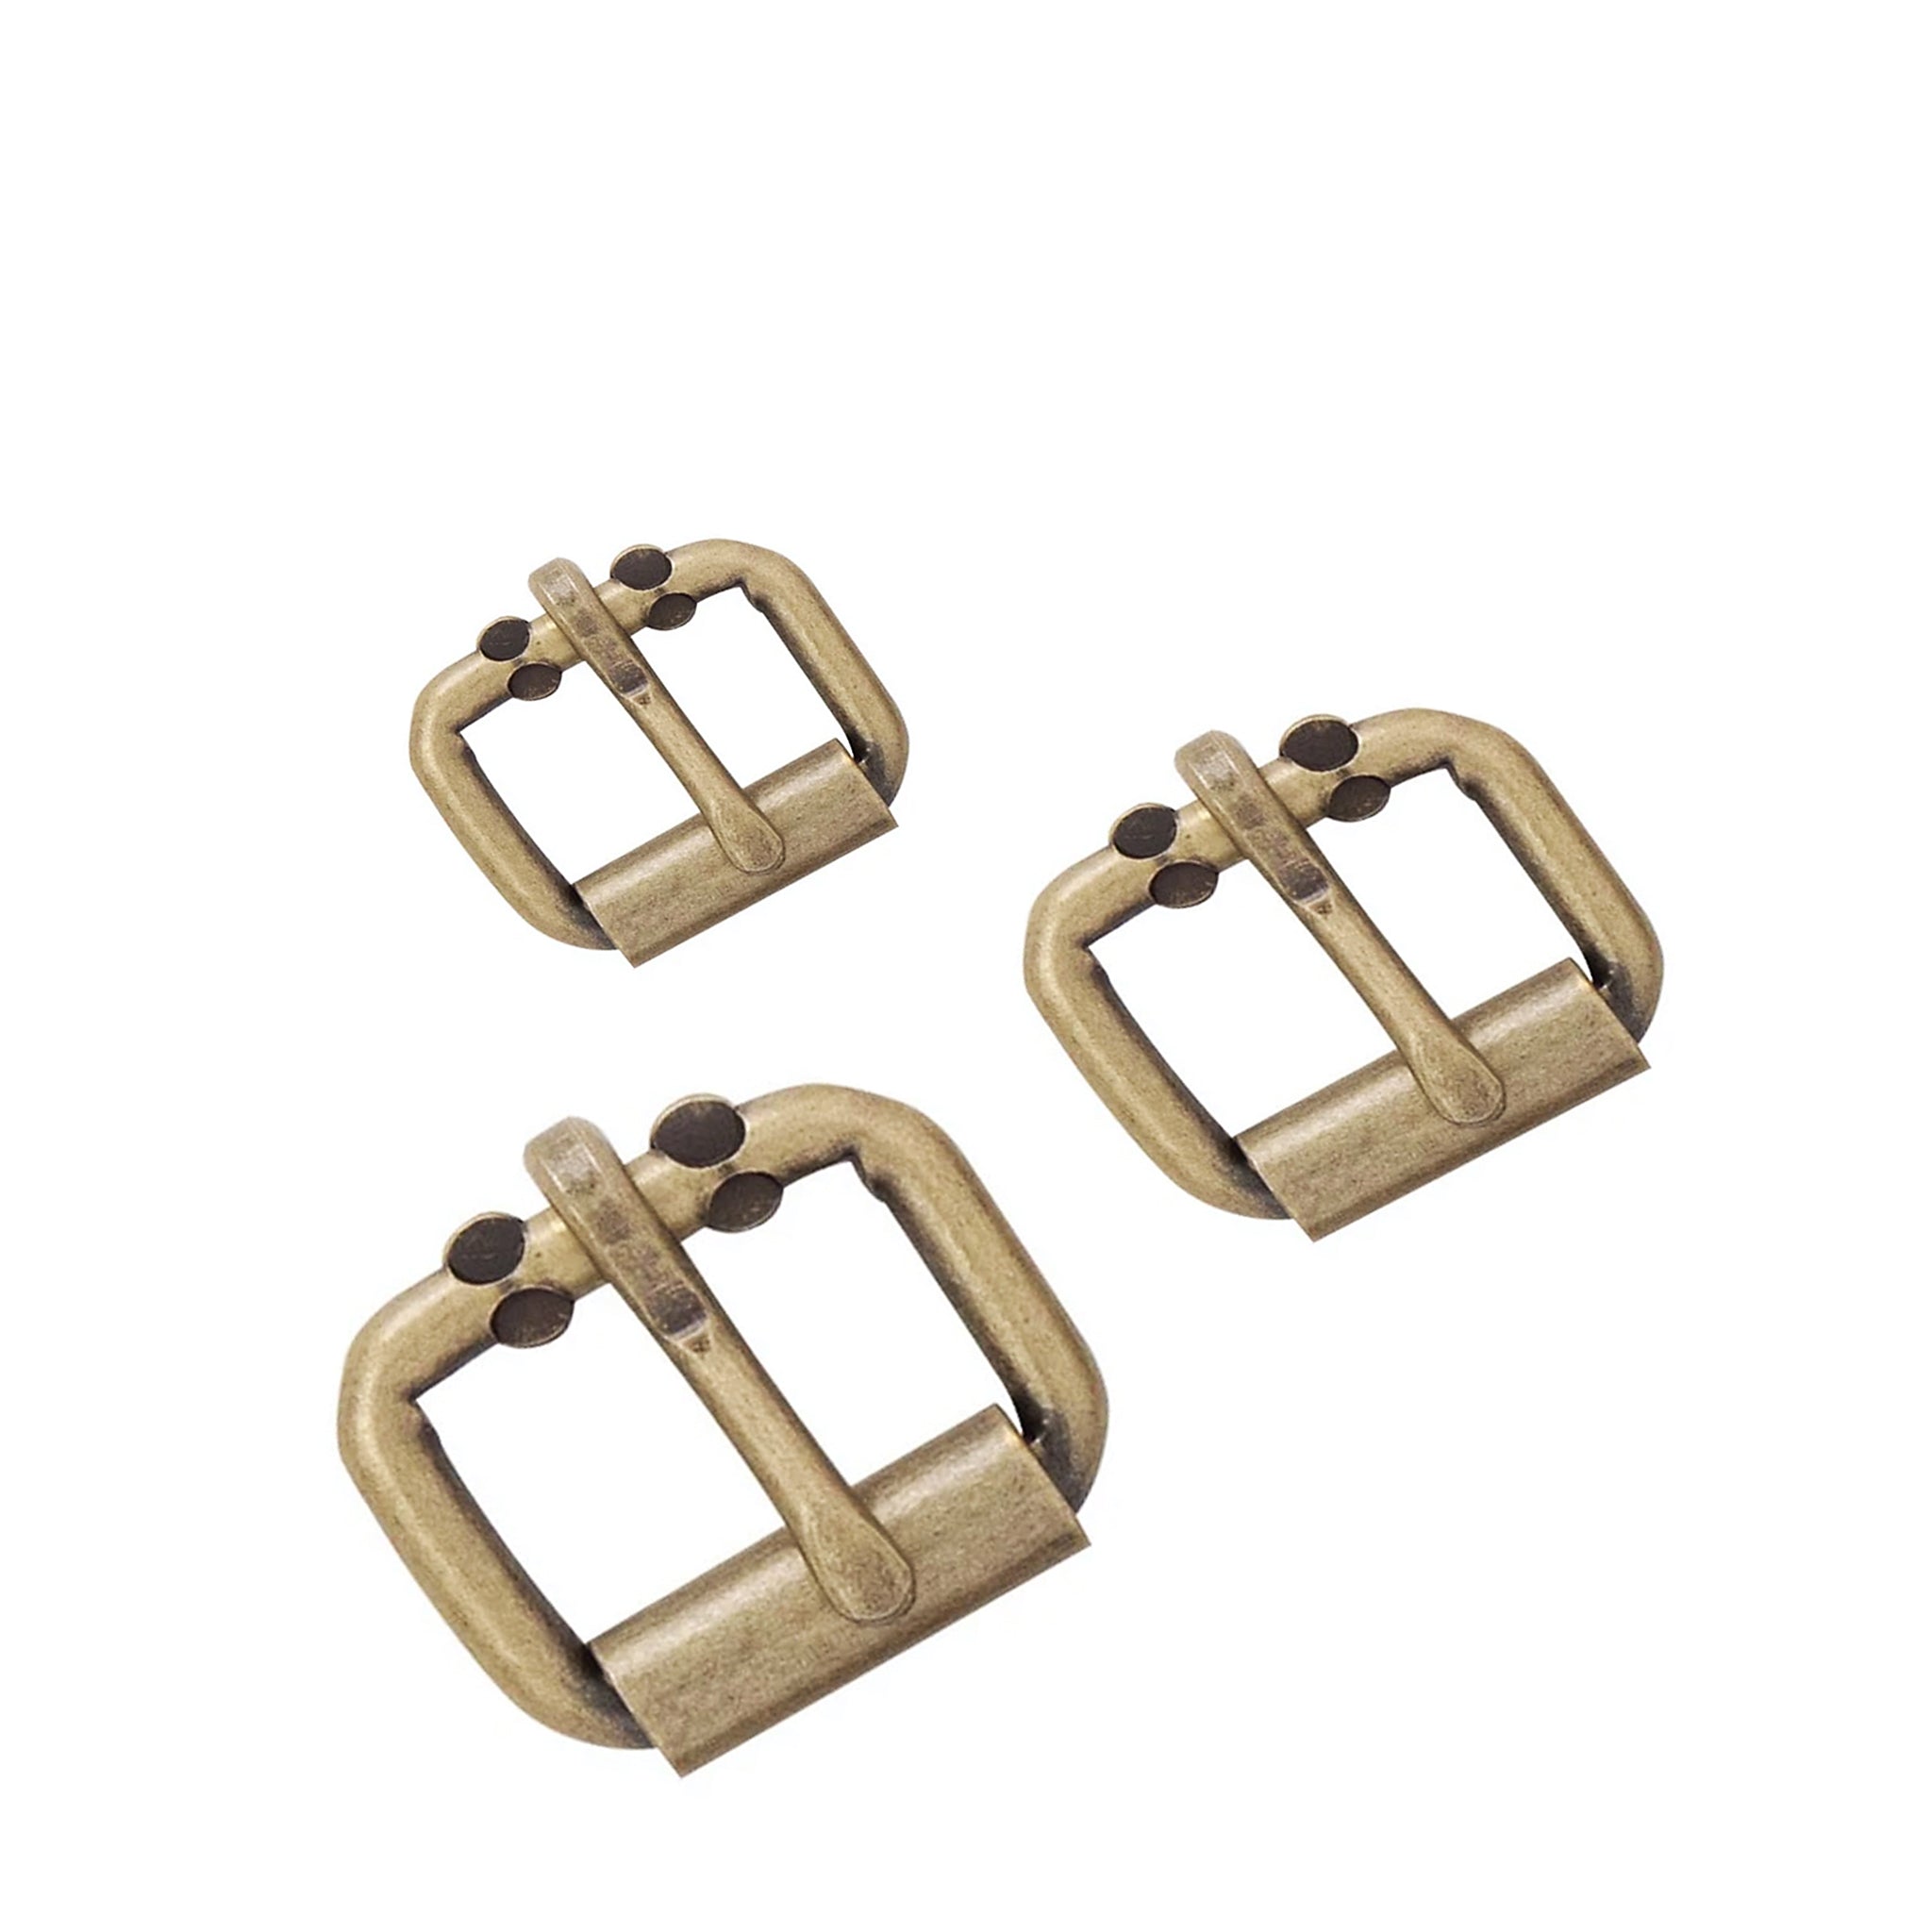 Single Prong Roller Buckles - Antique Brass from Identity Leathercraft